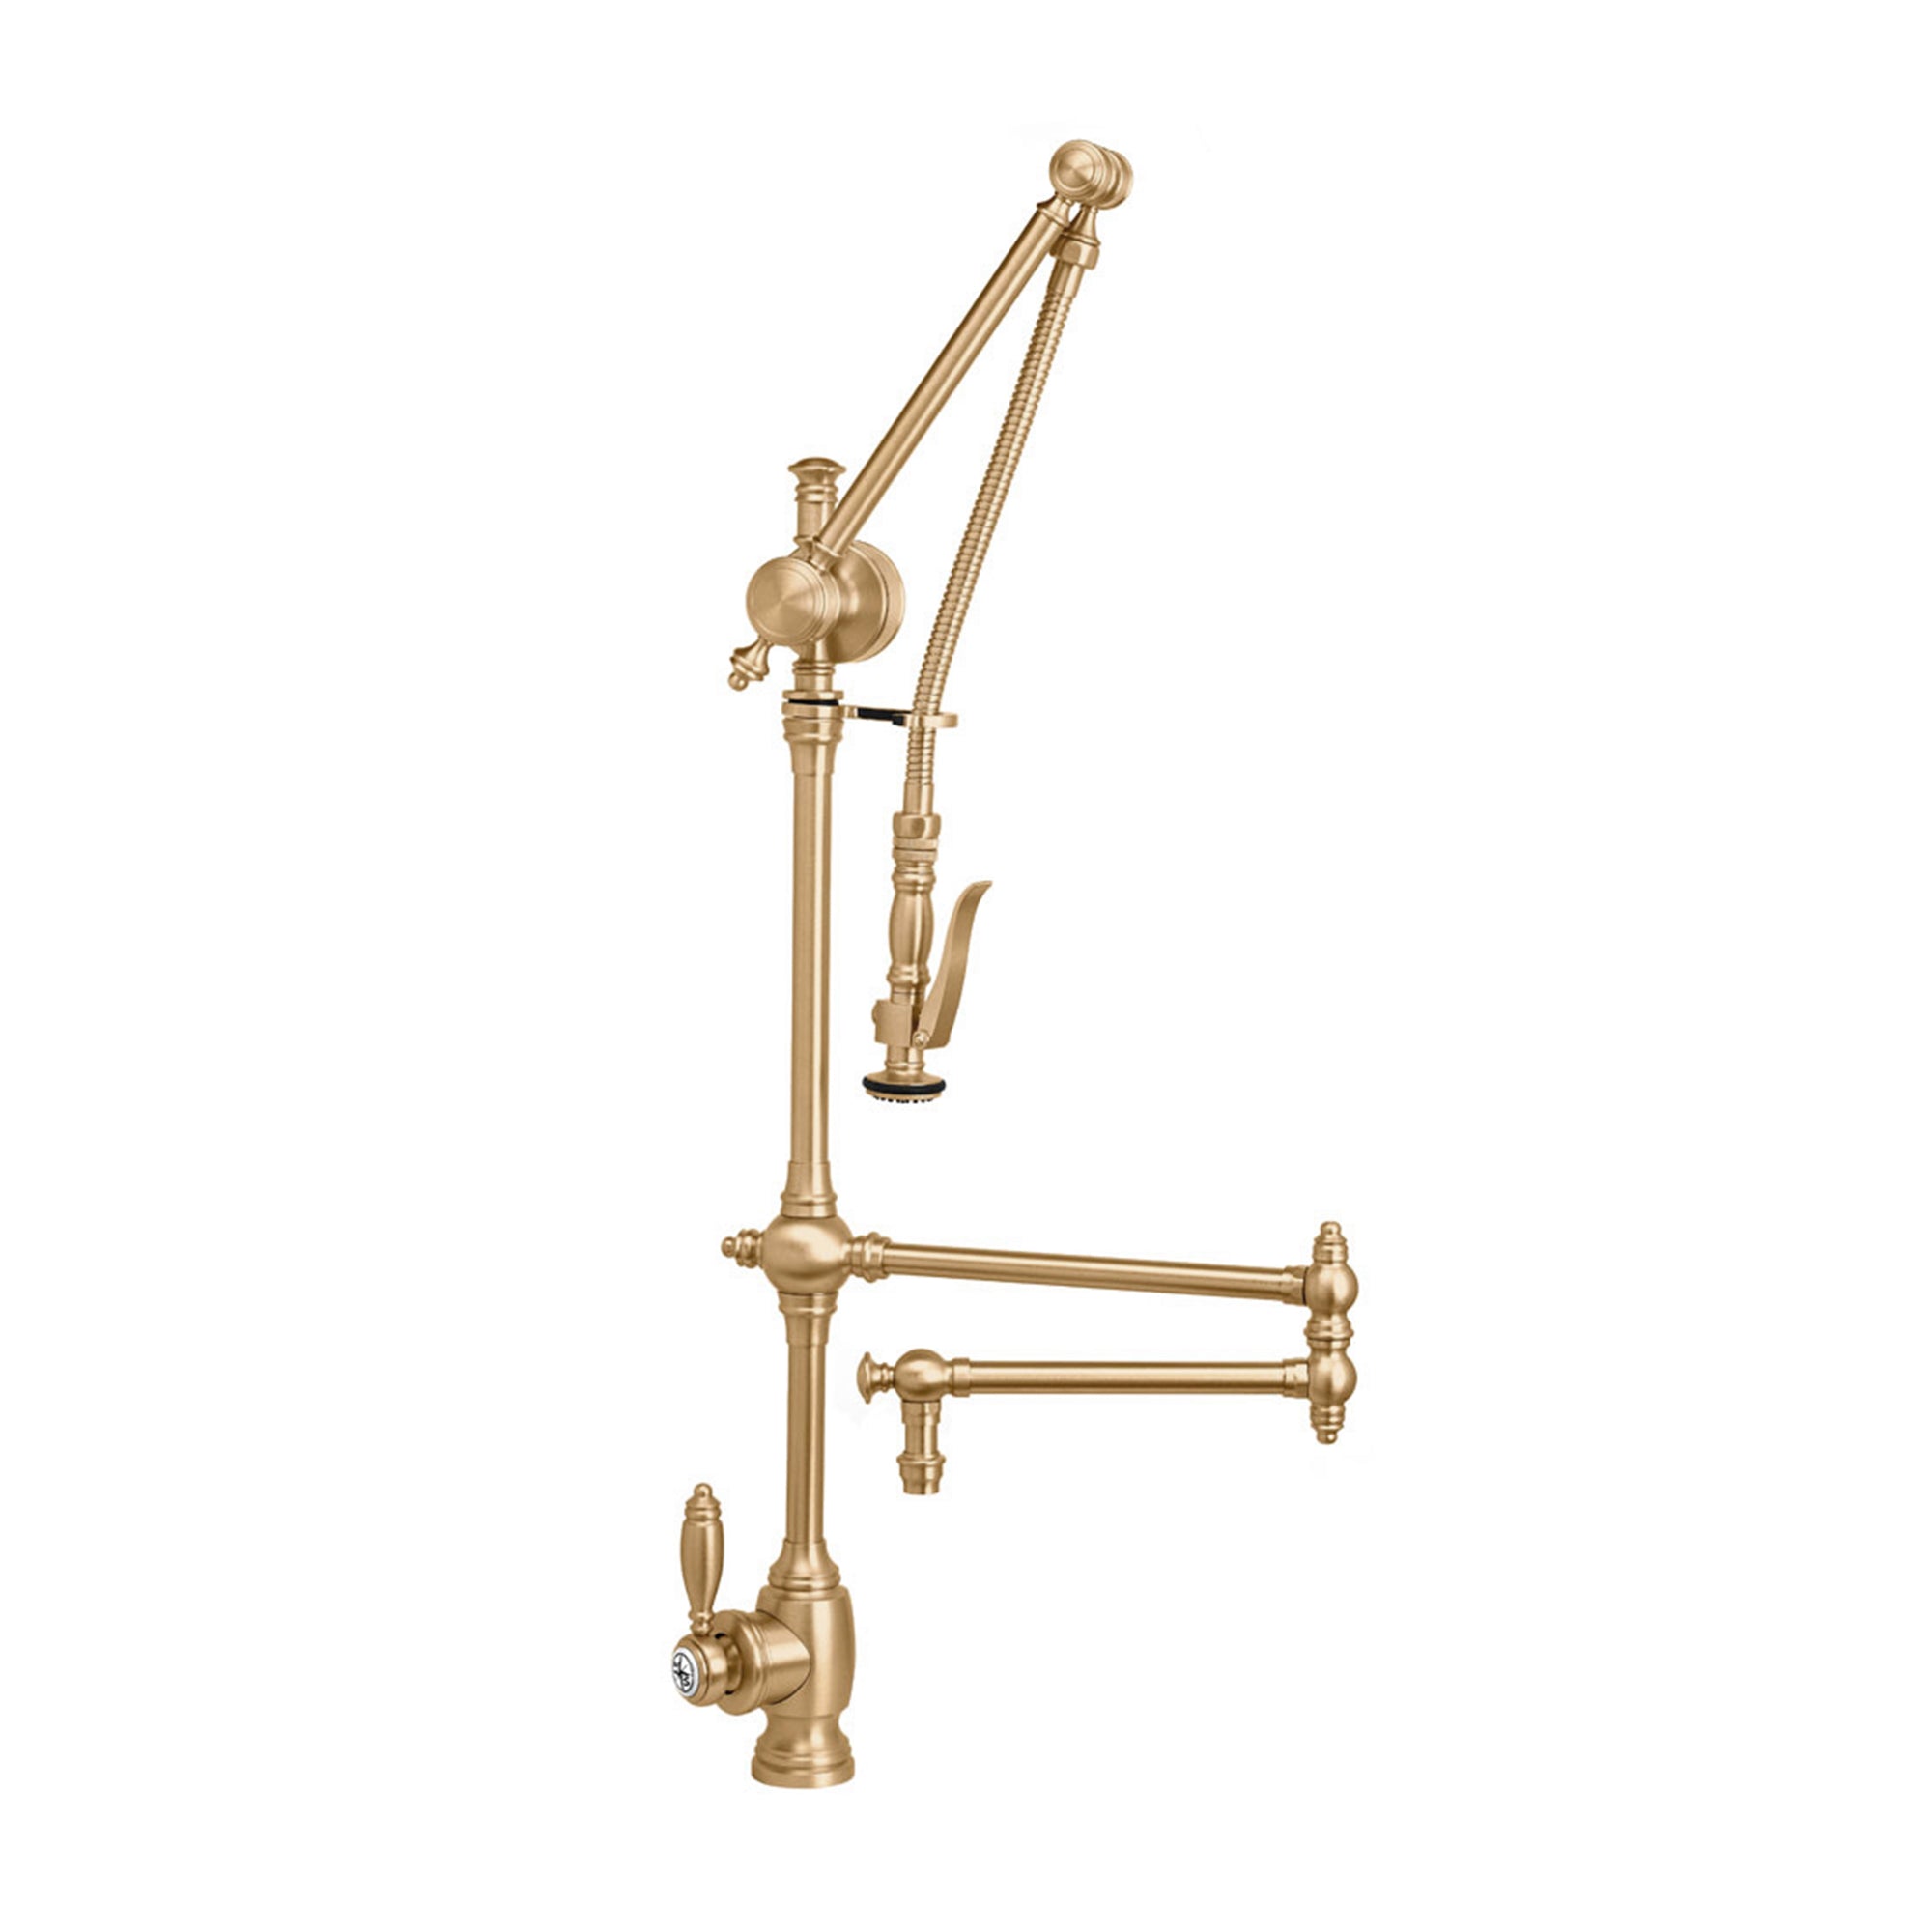 Waterstone Traditional Gantry Faucet – Articulated Spout 4410-18